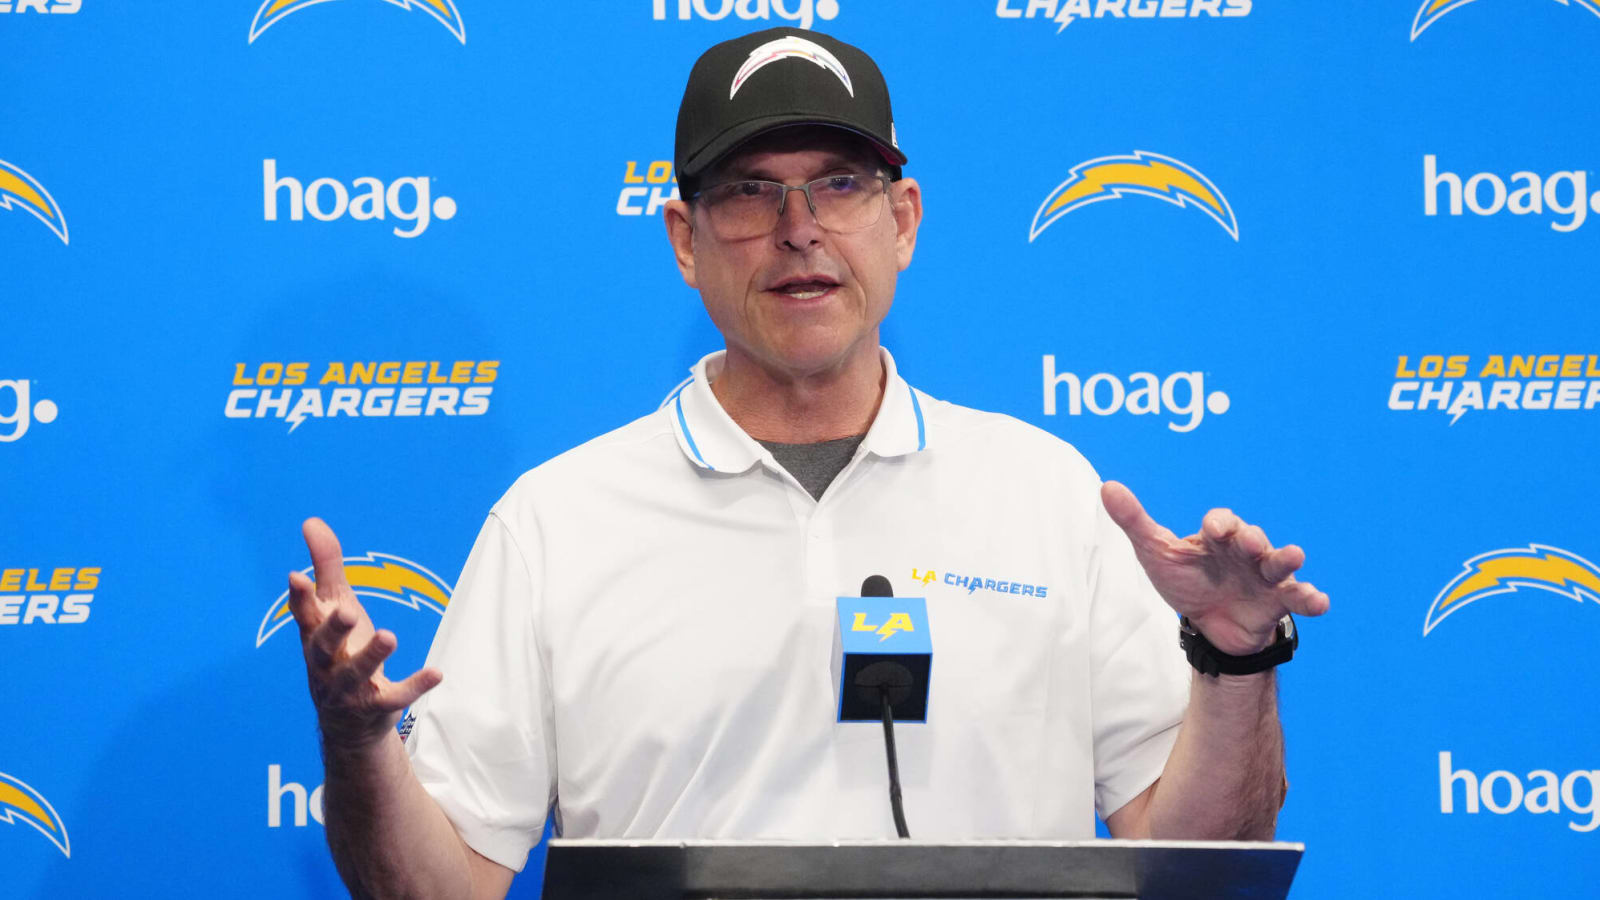 NFL Analyst Forecasts Los Angeles Chargers as “Hot Team” Poised to Seize Control of AFC West